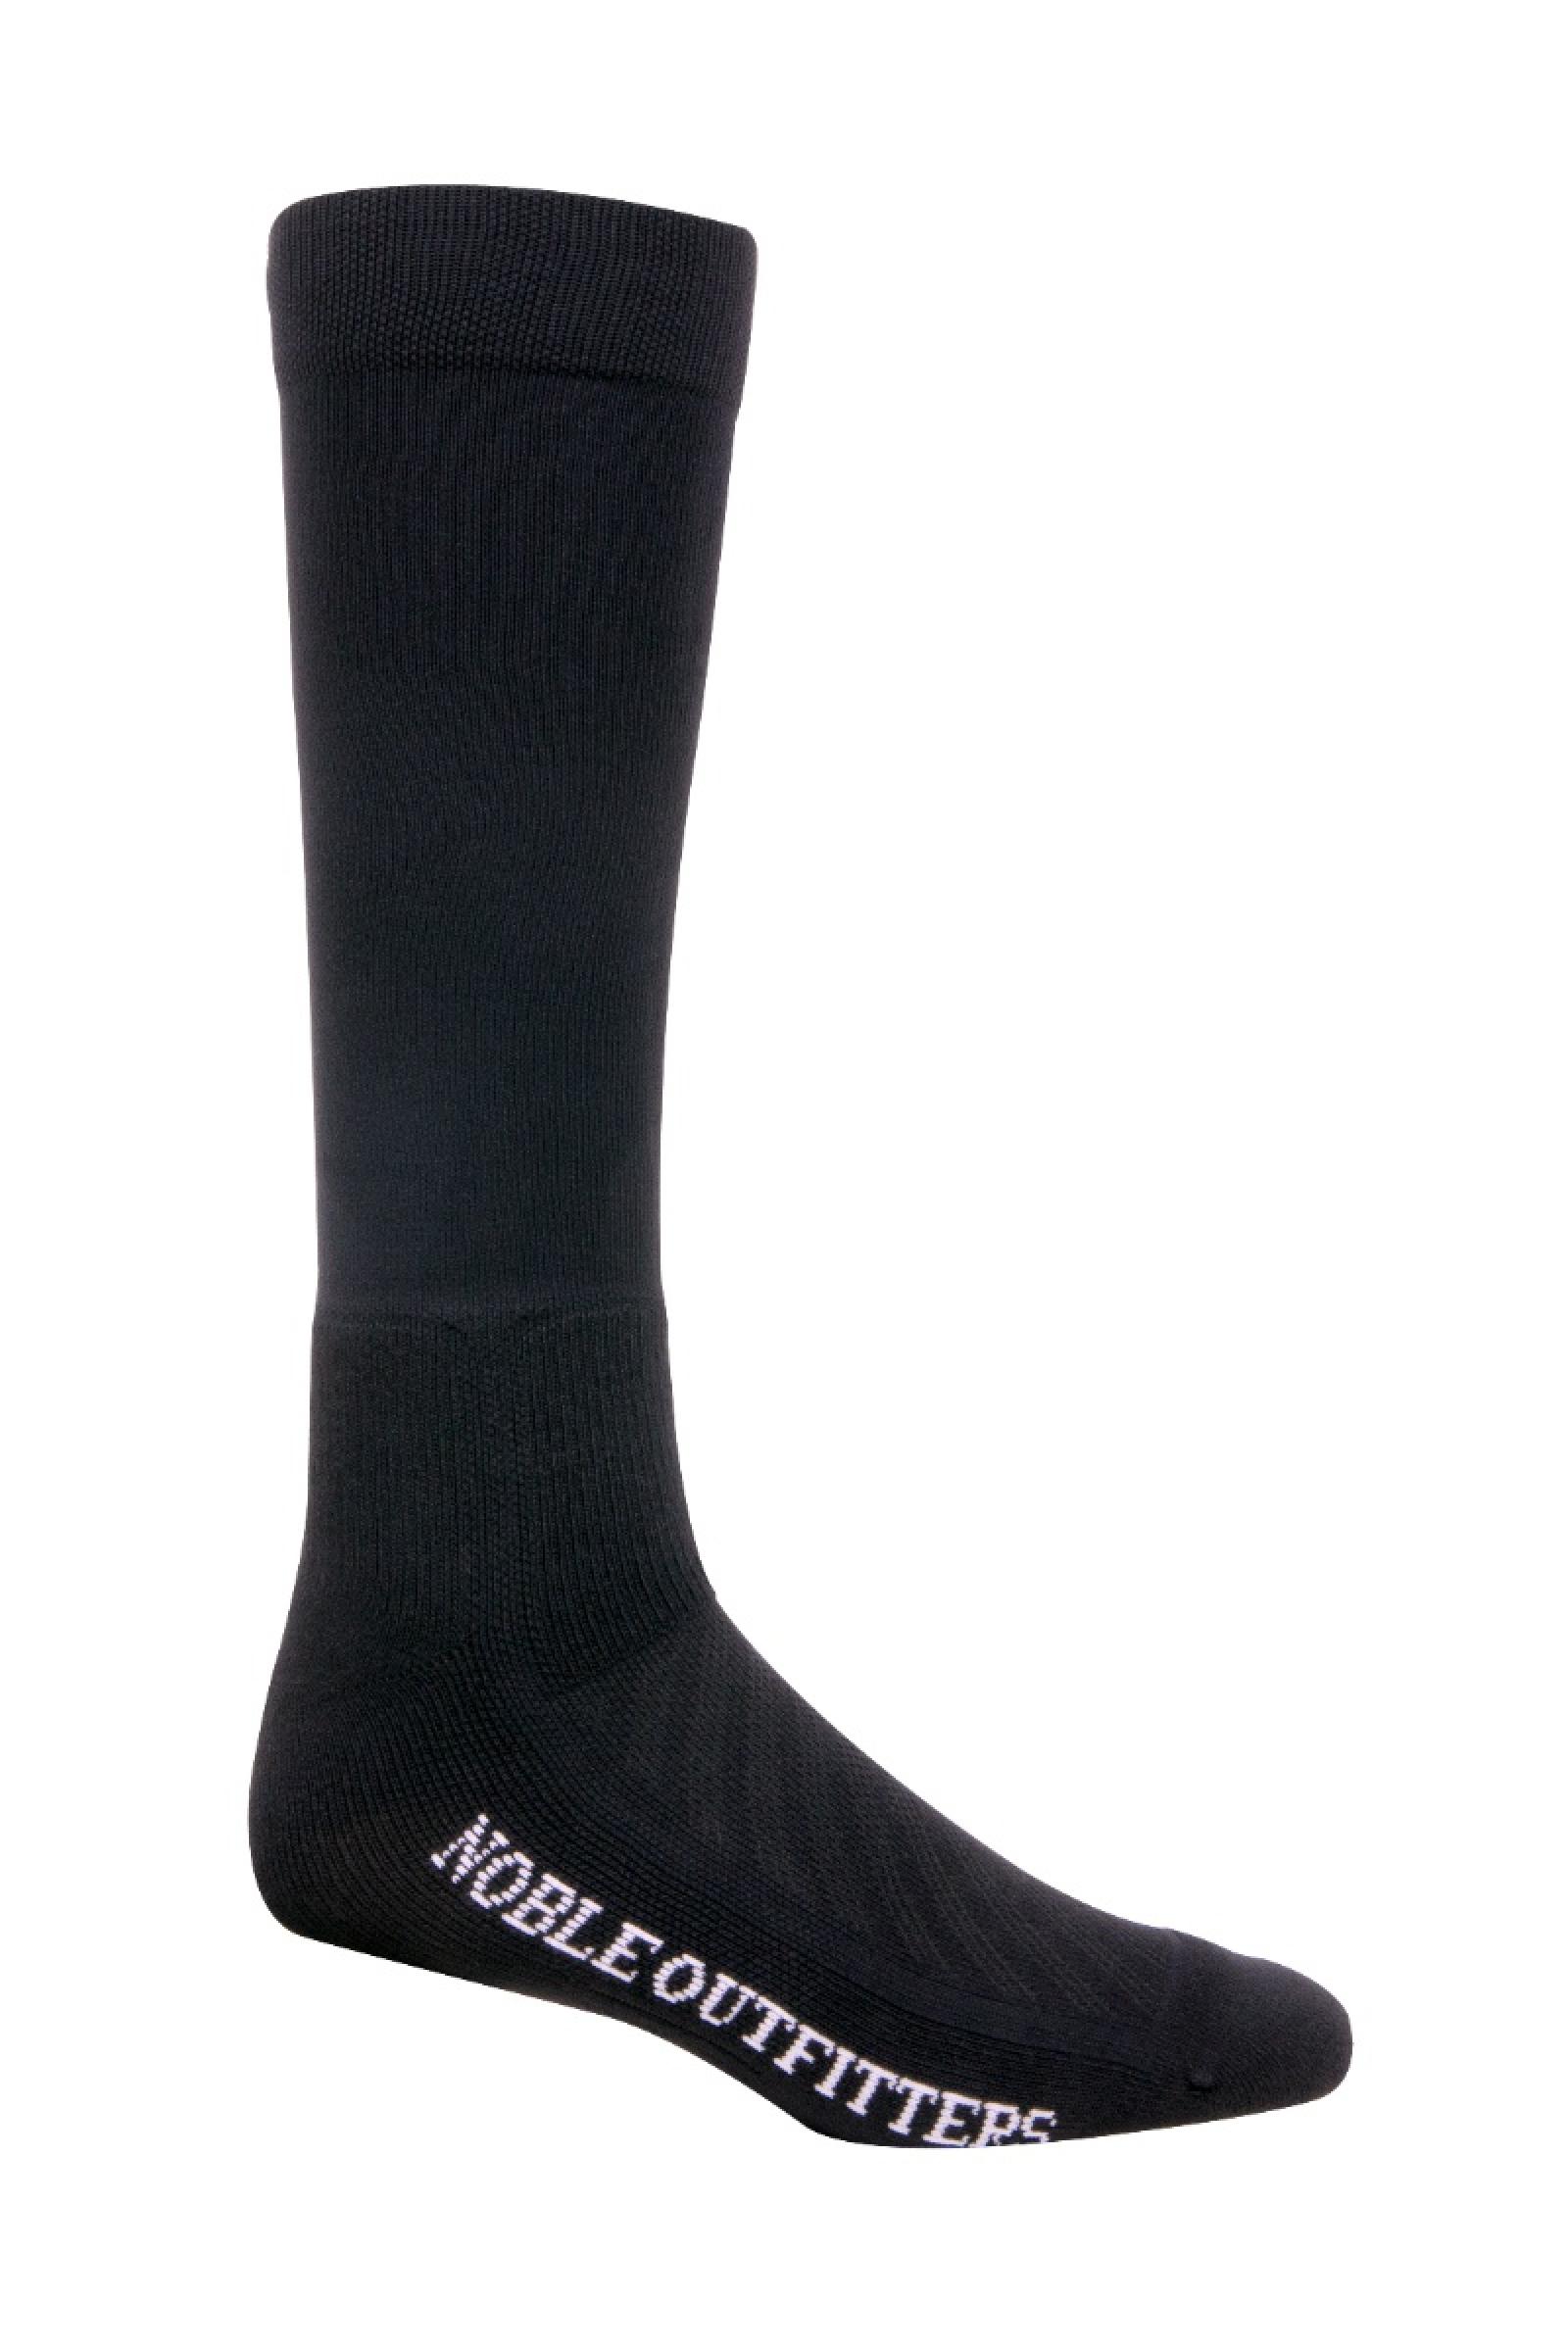 Noble Outfitters Ultrathin Performance Boot Sock